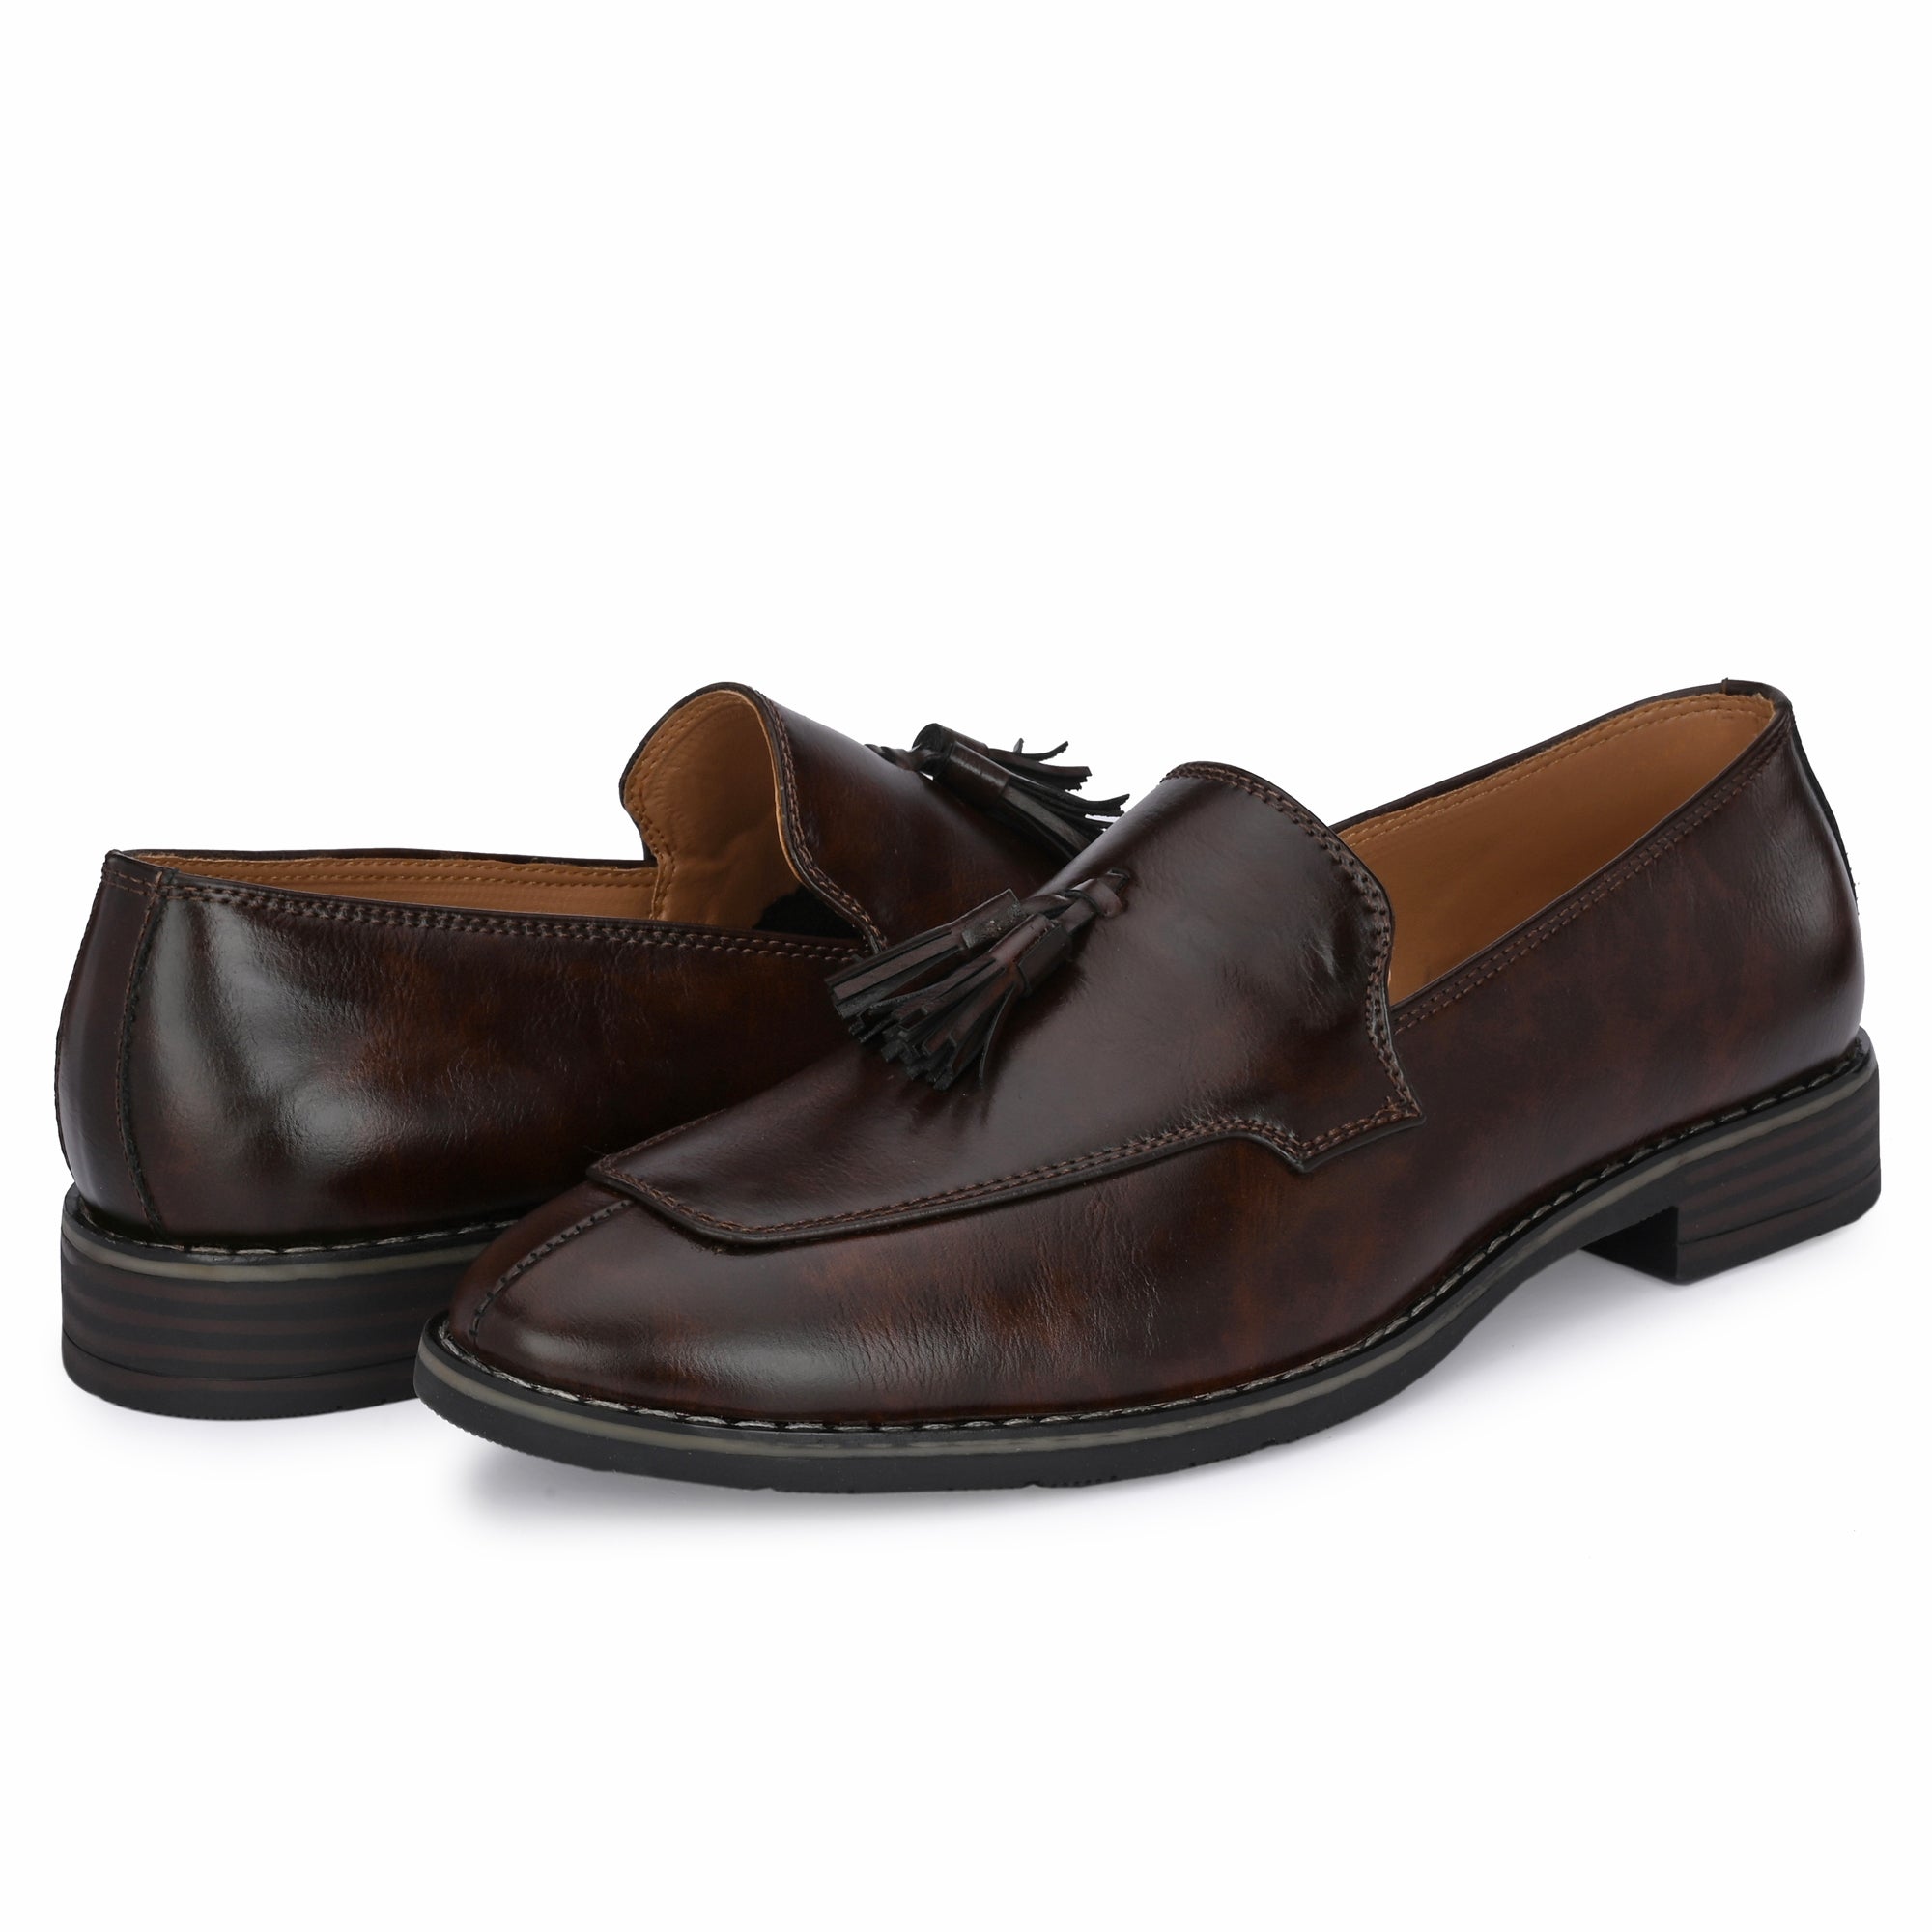 brown-loafers-attitudist-shoes-for-men-with-tassel-sp13b